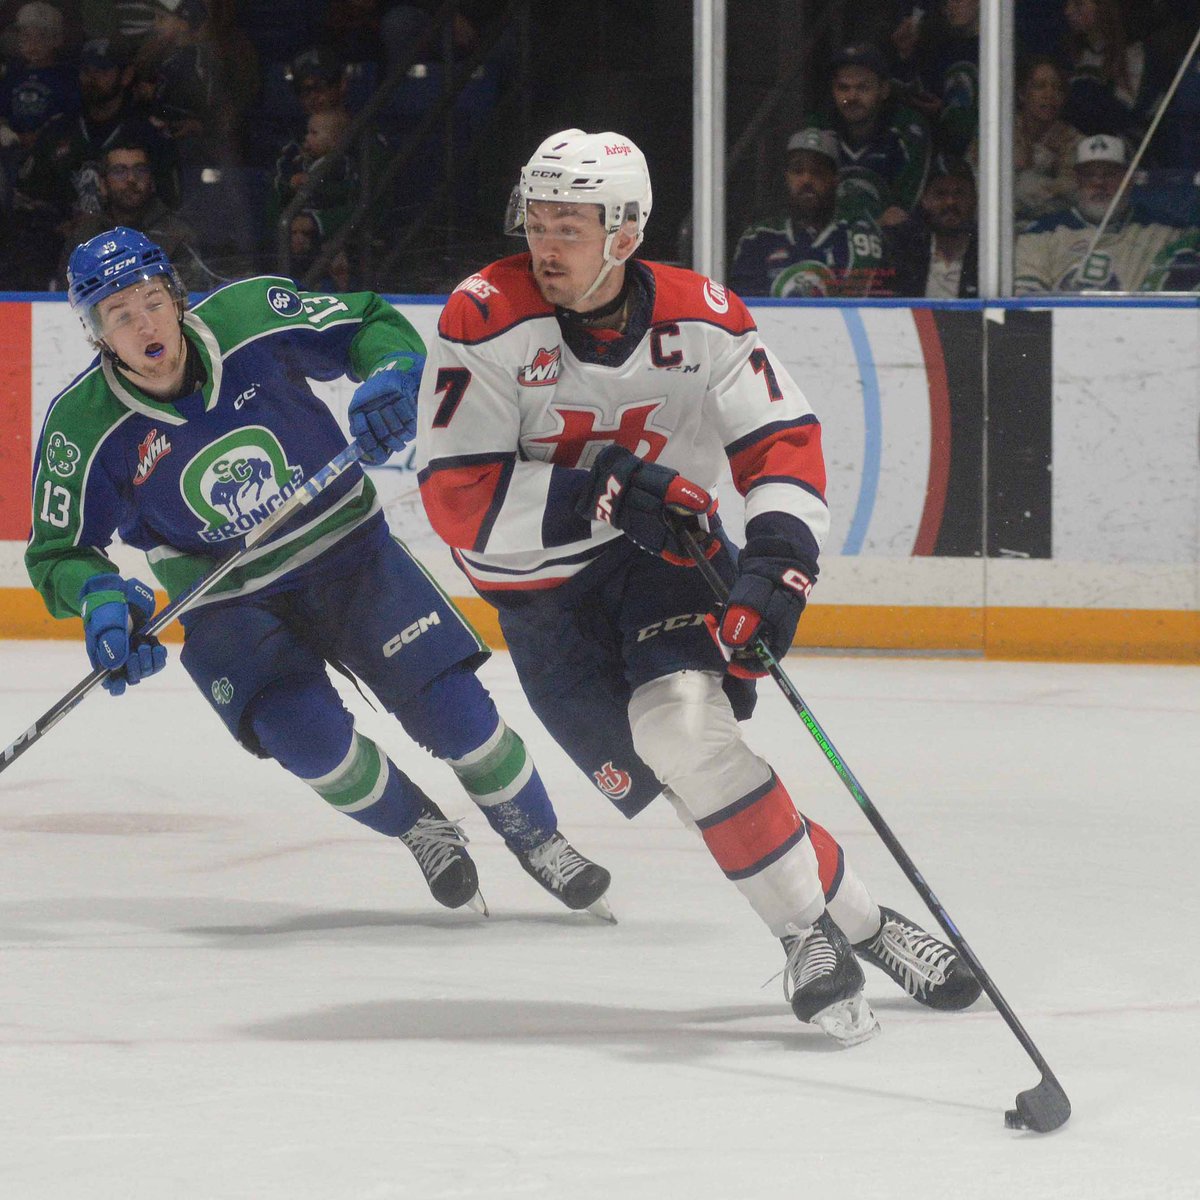 Dinsmore’s Joe Arntsen has signed a 1-year deal with the Abbotsford Canucks after 268 WHL games on the Lethbridge Hurricanes blue line 

📷: STEVEN MAH